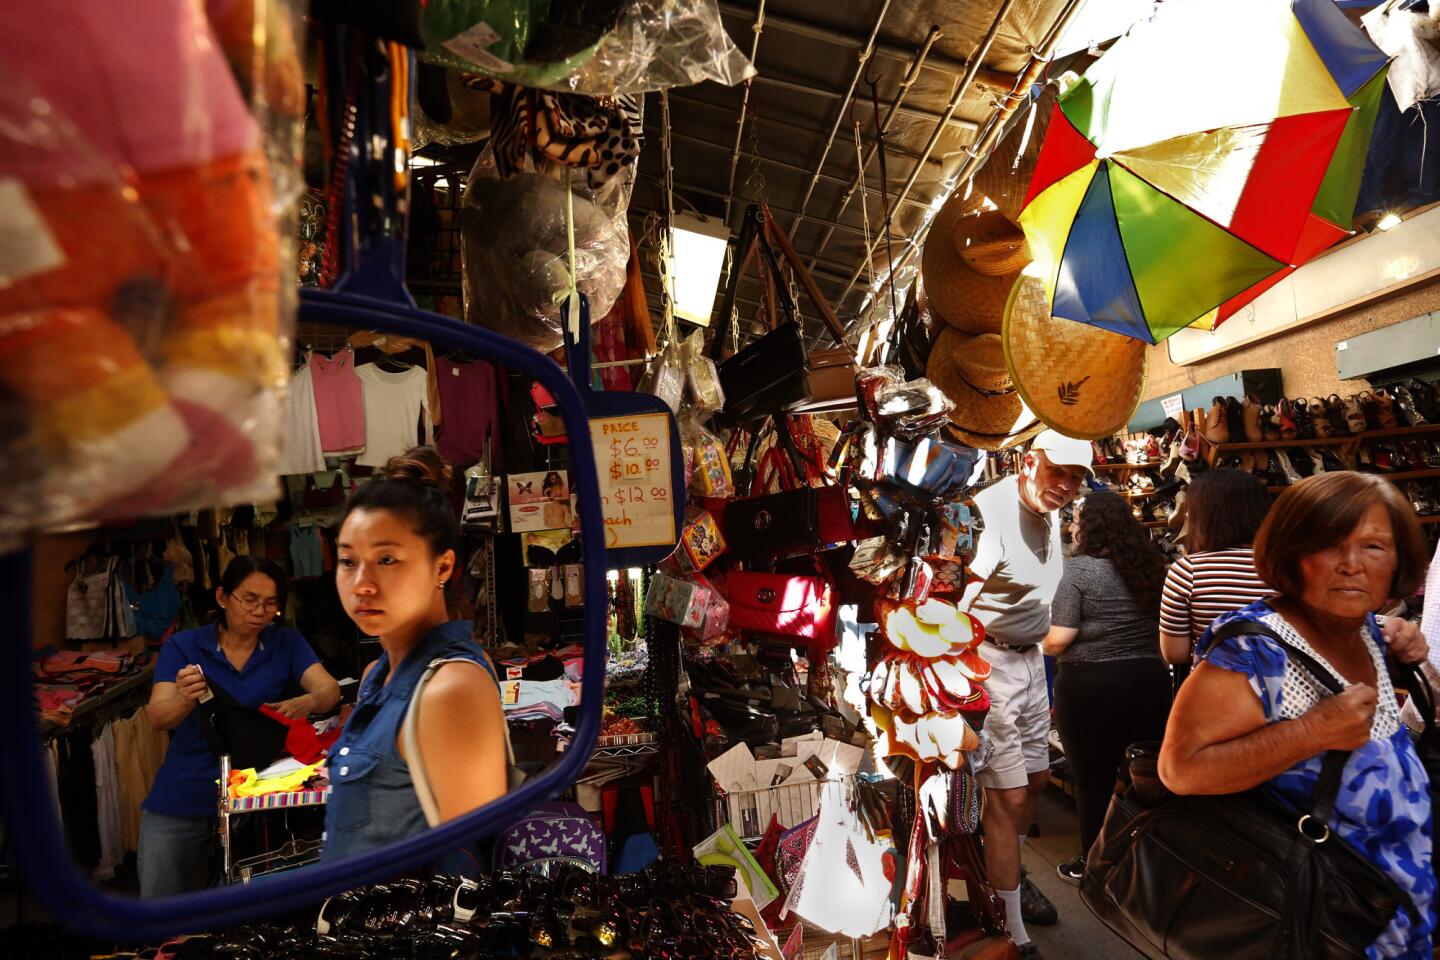 Shoppers are caught in a mirror as others make their way through the swap meets at Saigon Plaza in Chinatown. There are many changes coming to Chinatown including wine bars, fancy office space, art galleries that could alter the future of the swap meets.